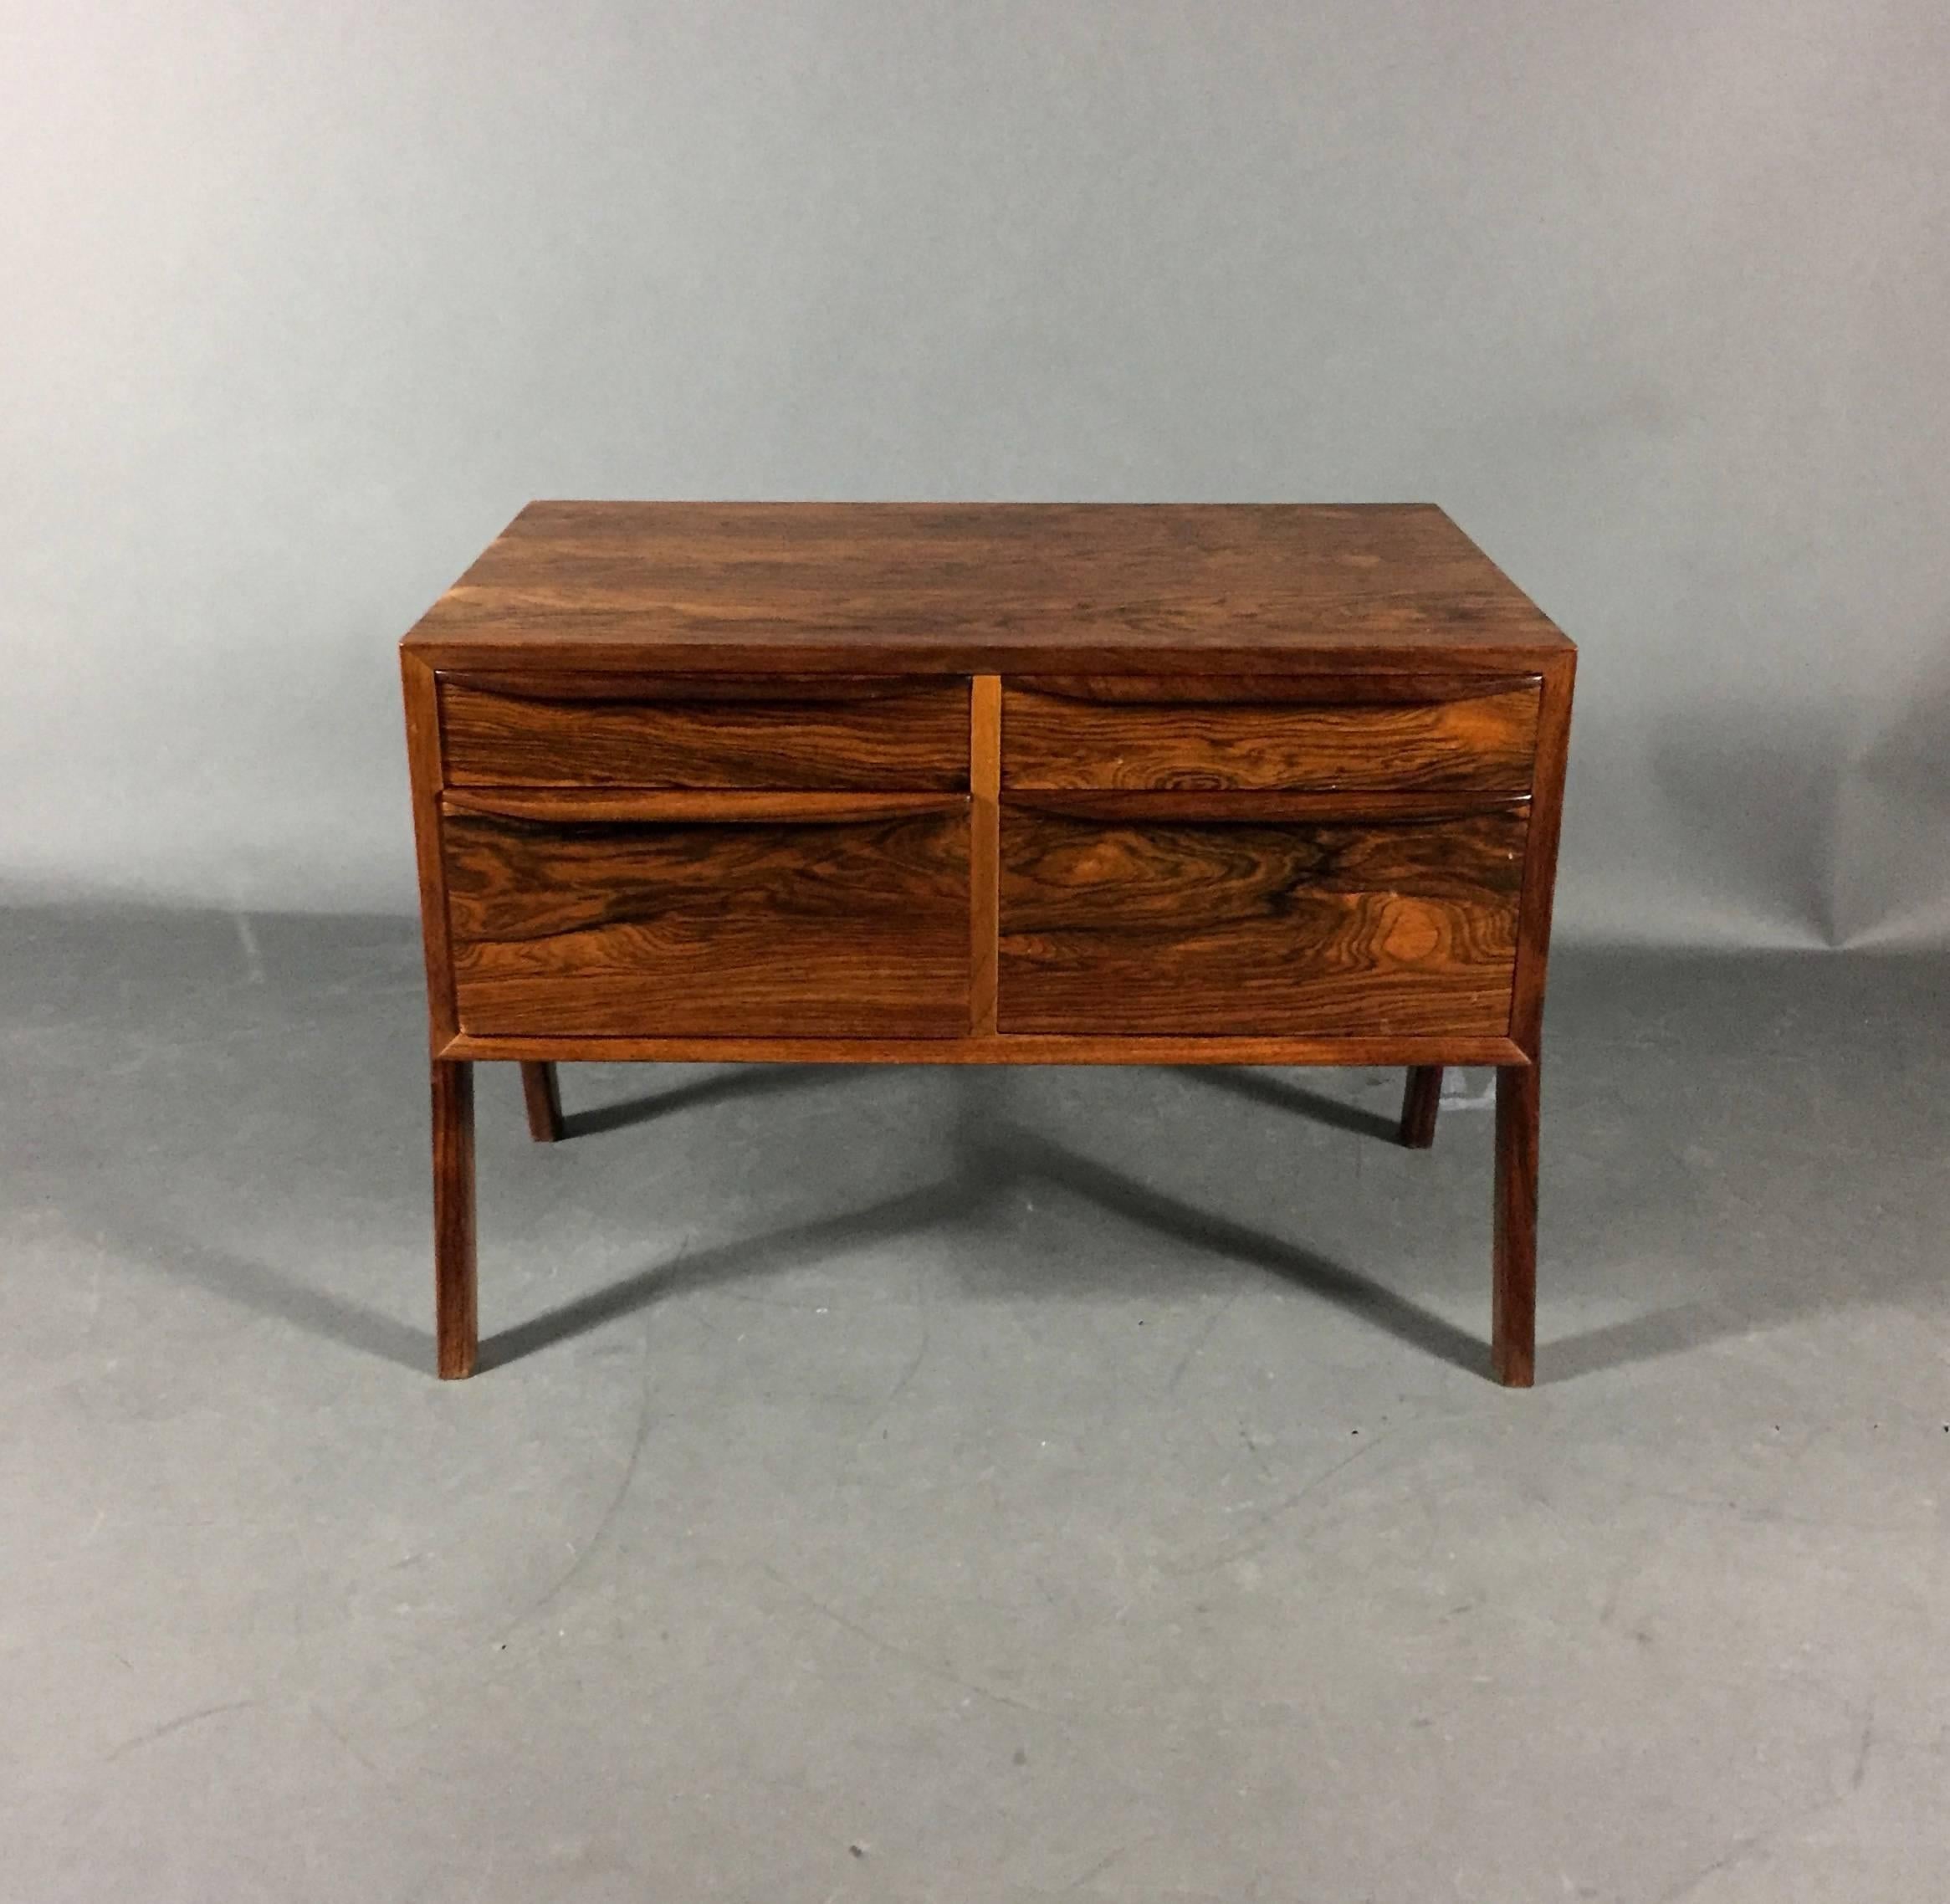 Originally designed as a sewing box with built in inserts for thread, bobbins, pins and other sewing notions. This small rosewood cabinet can be used as a side or end table with nicely proportioned A-frame side legs. Danish design, 1950s. Excellent